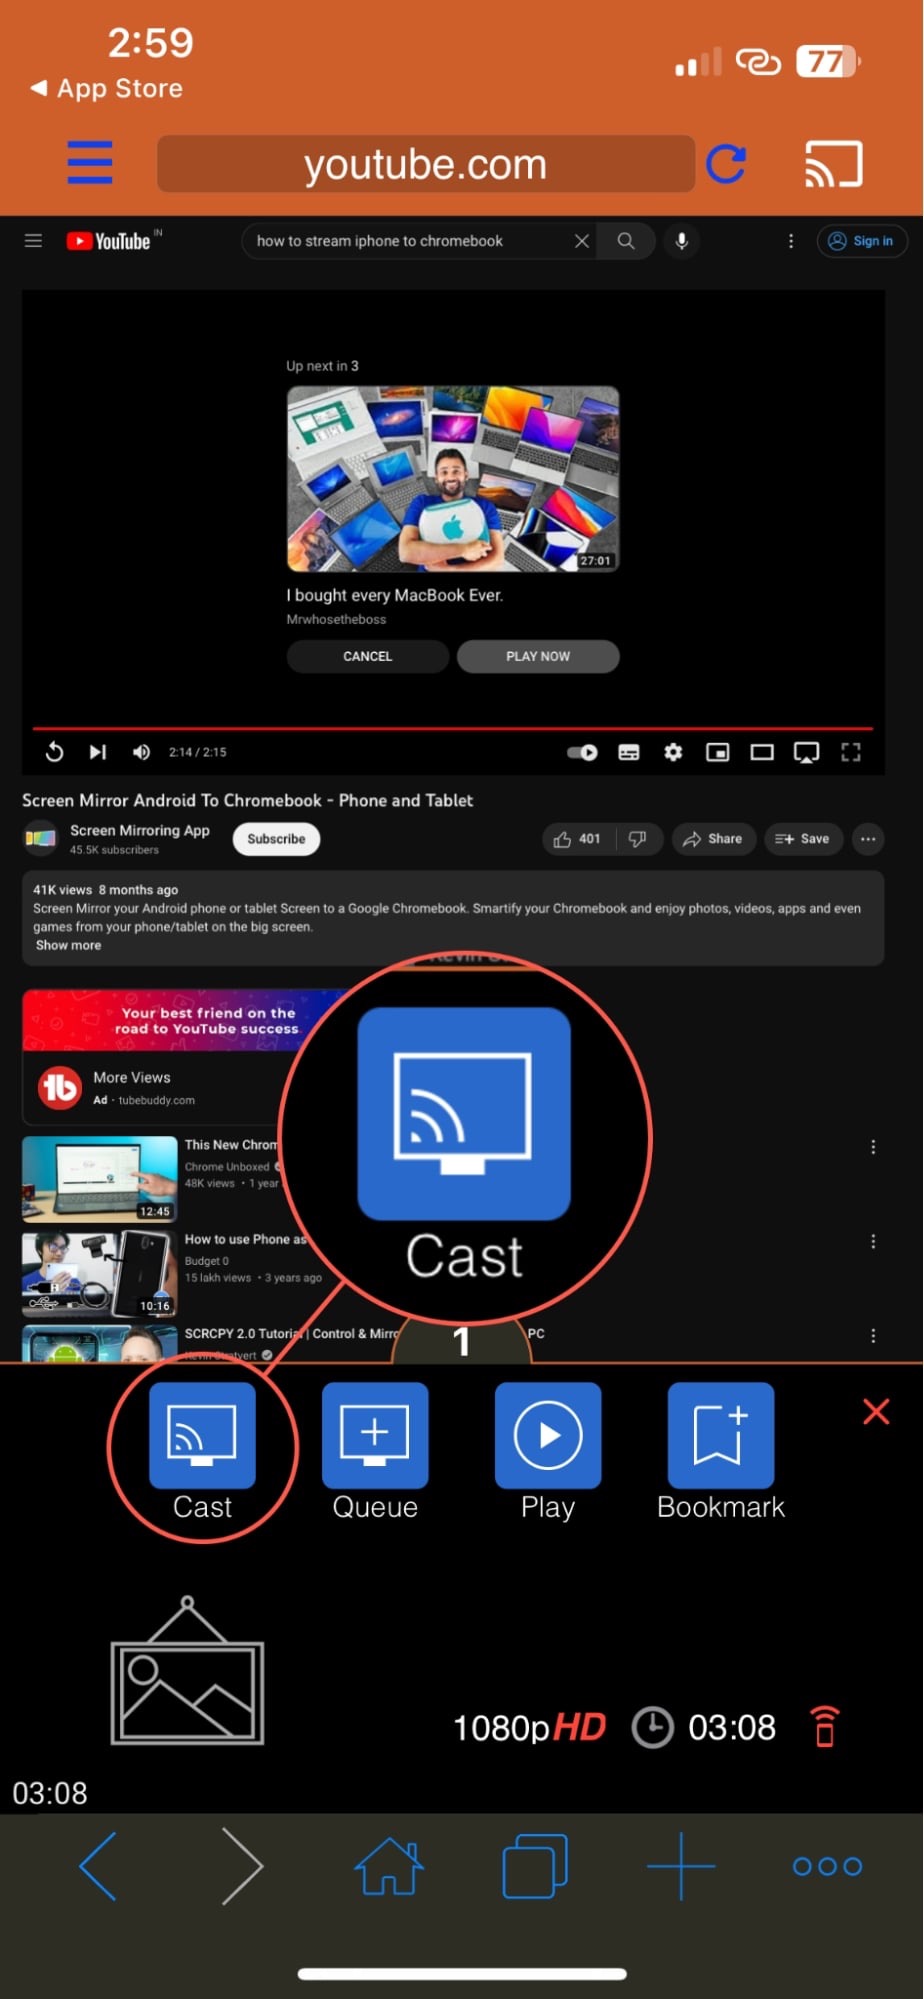 Tap on the Cast button in iWebTV